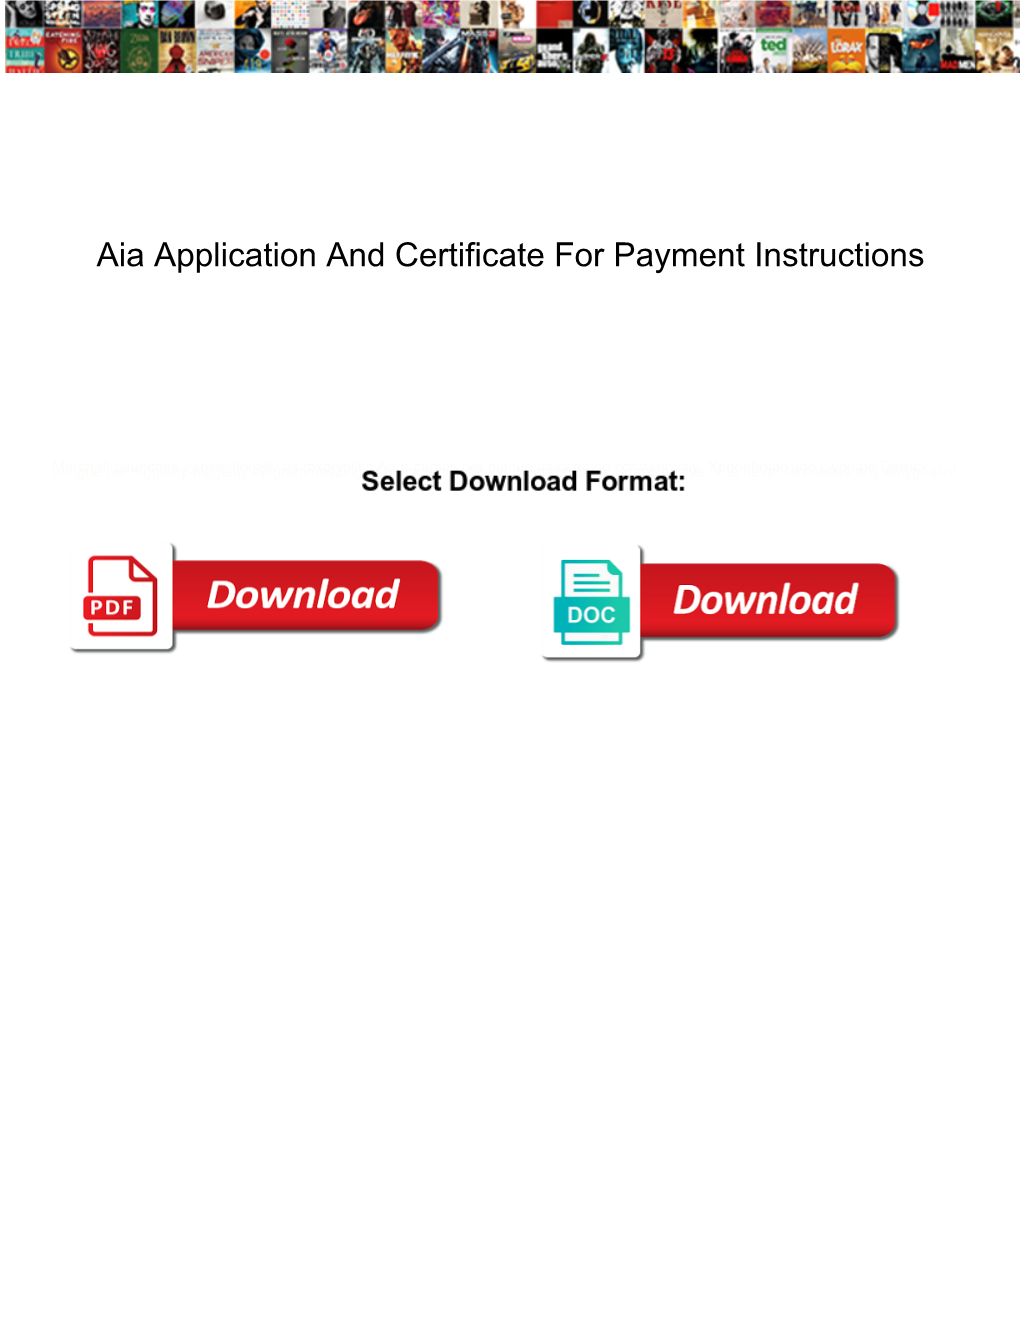 Aia Application and Certificate for Payment Instructions